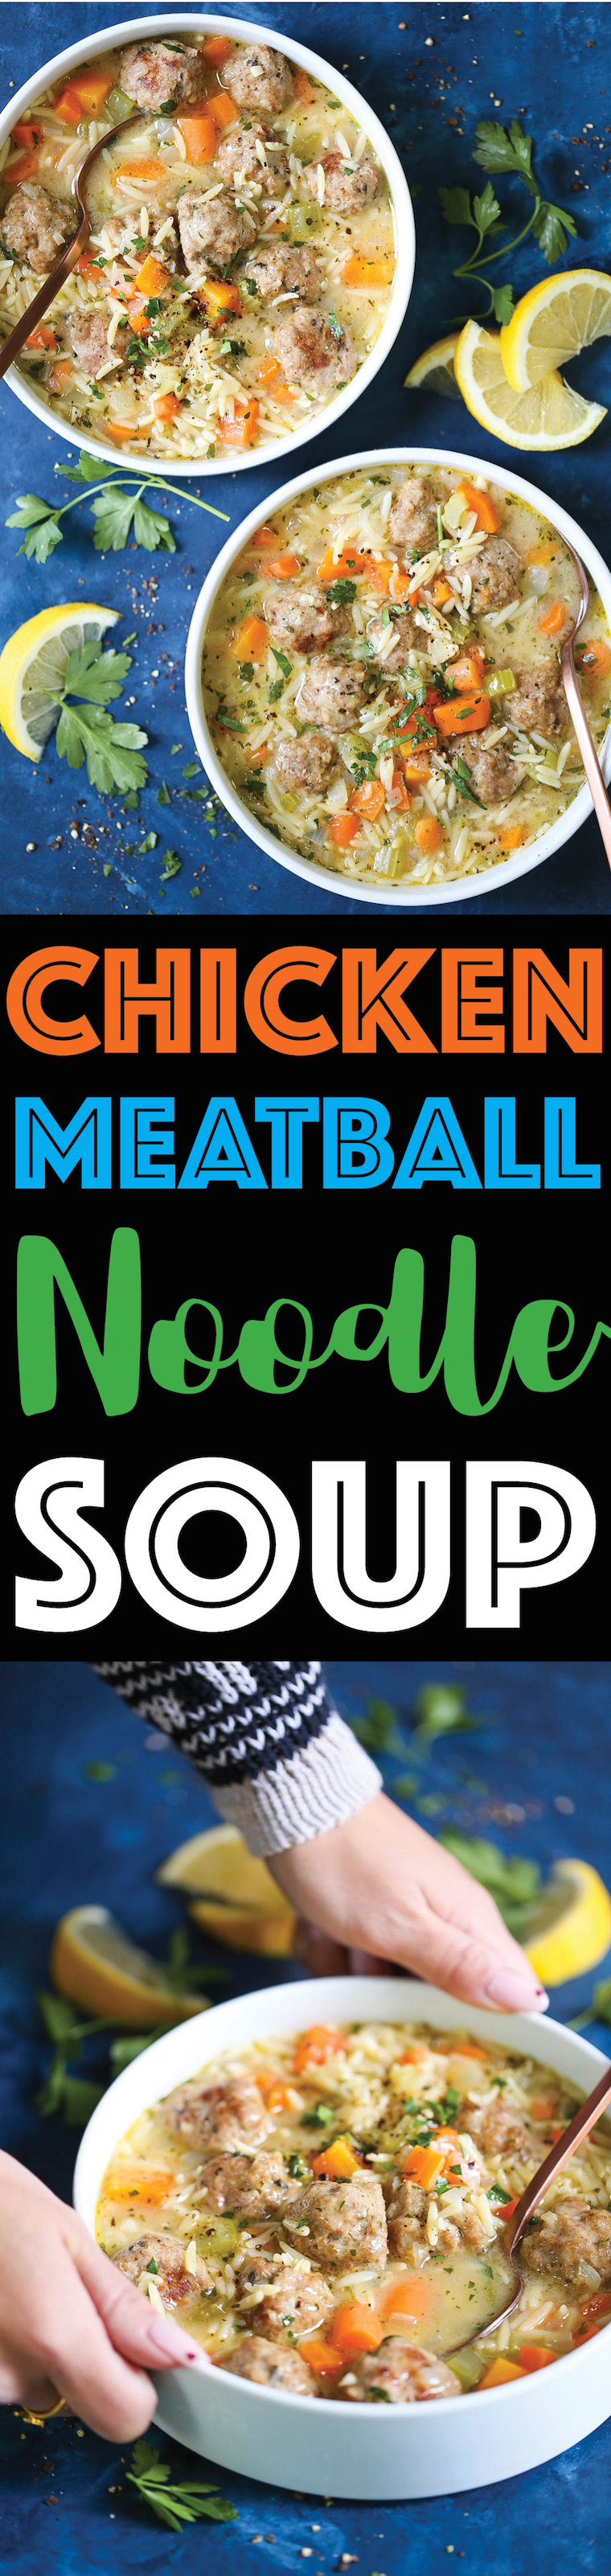 Chicken Meatball Noodle Soup -  This is just like everyone’s favorite cozy, comforting homemade chicken noodle soup except made even better with chicken meatballs! You’ll only want this version of chicken noodle soup after trying this! Promise!